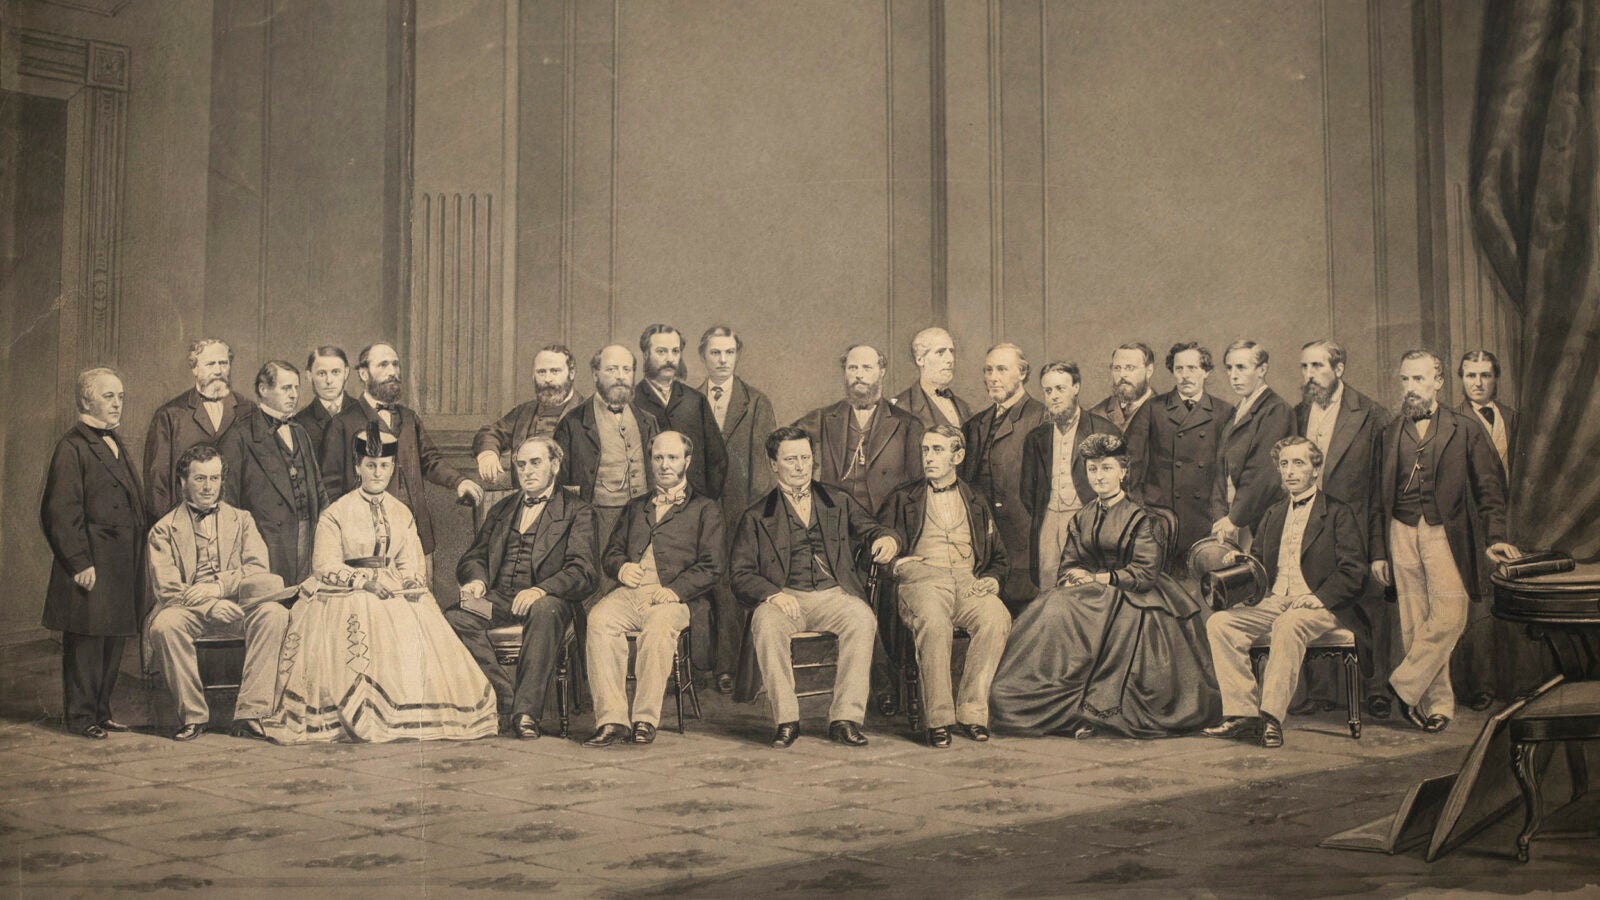 Group portrait from 1865.